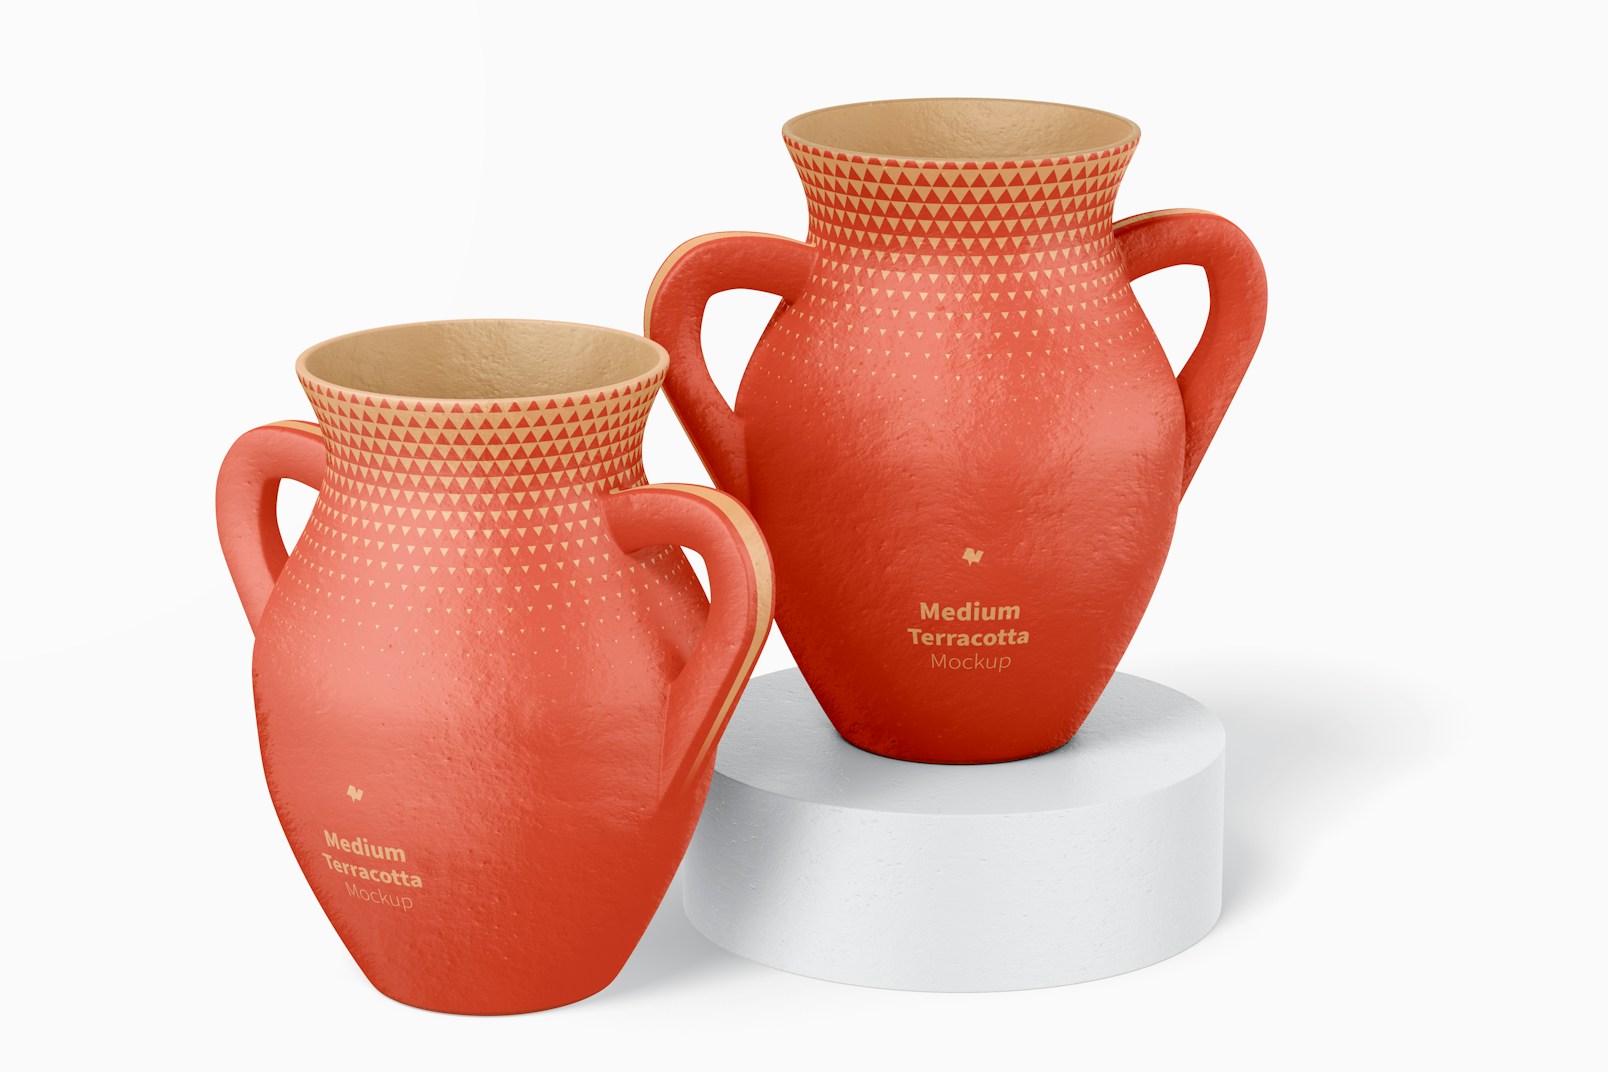 Medium Terracotta Vases with Handles Mockup, Front View